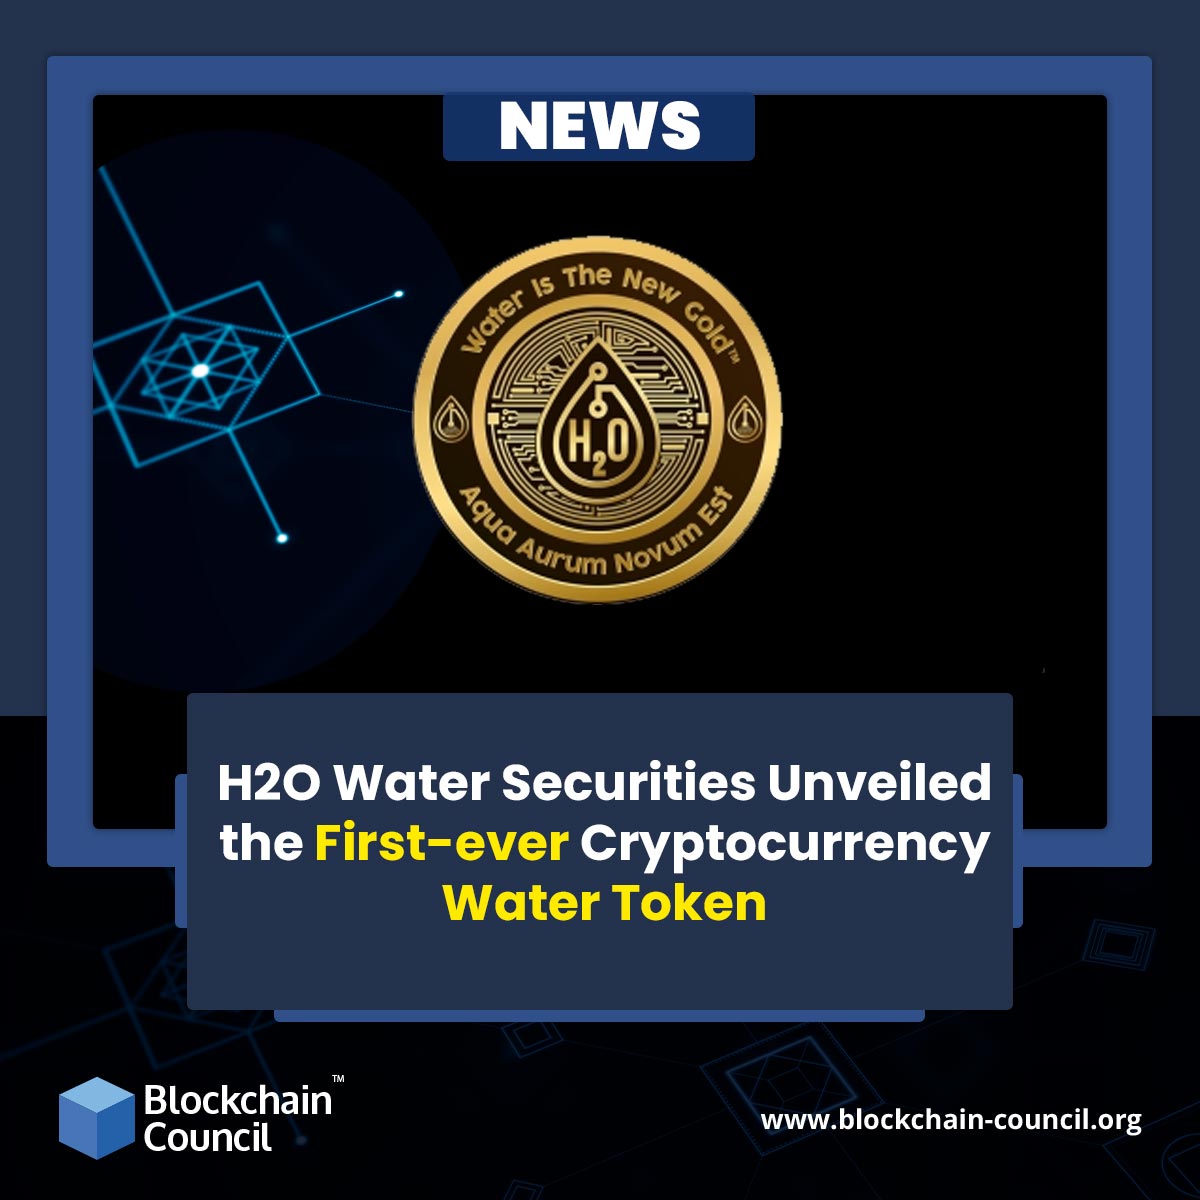 H2O Water Securities Unveiled the First-ever Cryptocurrency Water Token